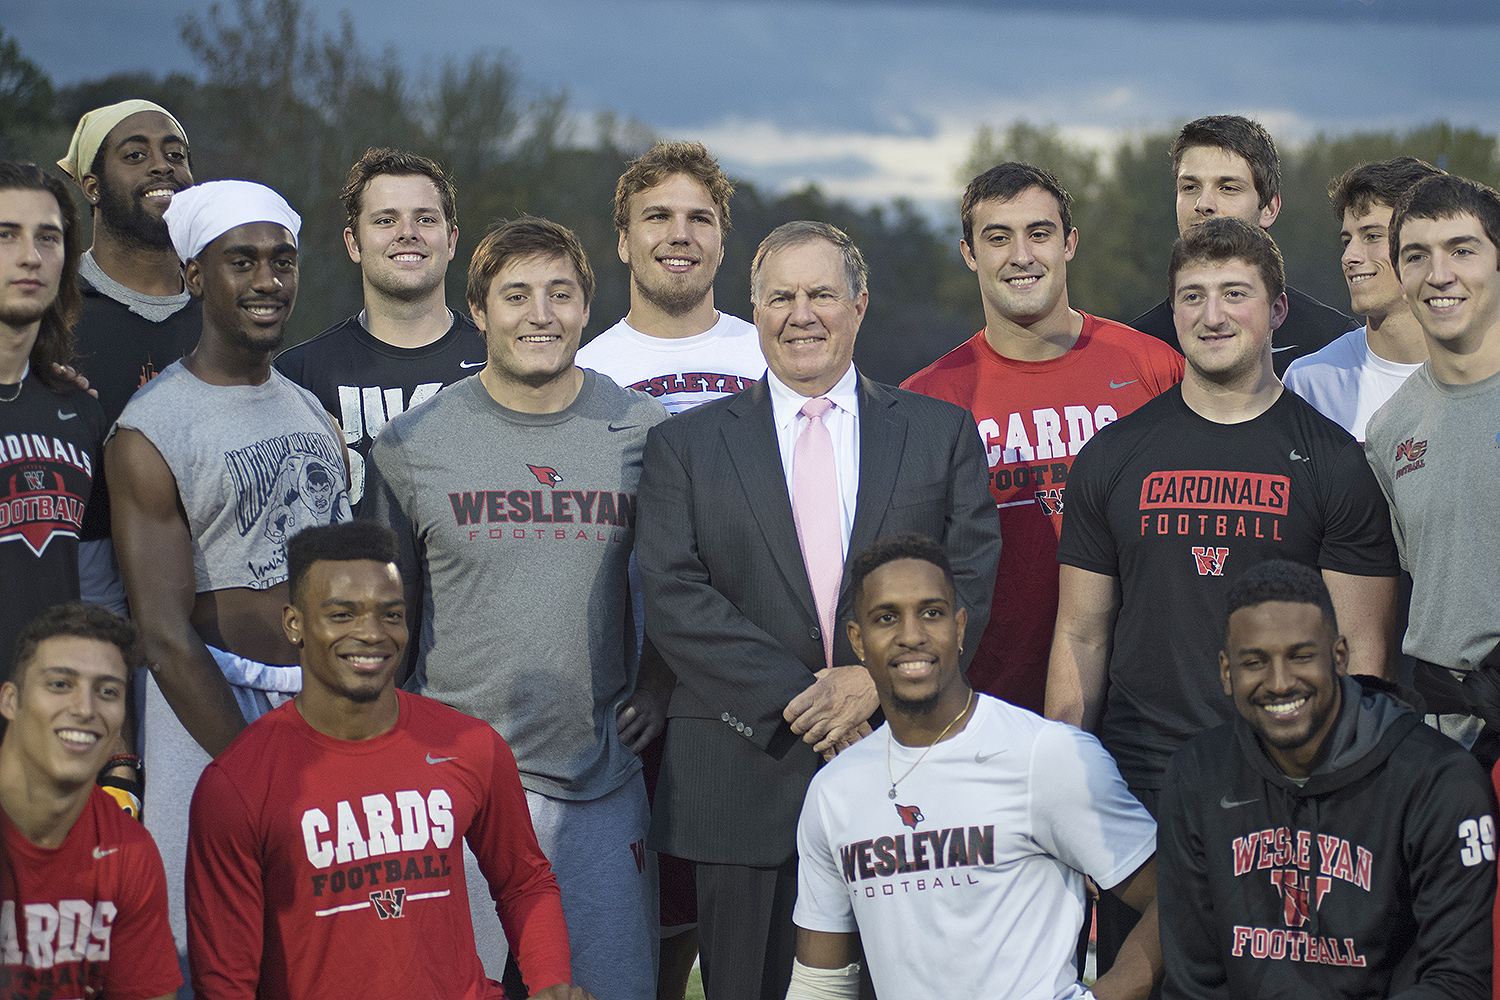 New England Patriots Head Coach Bill Belichick '75 met with members of the Wesleyan football team during the dedication of Belichick Plaza on Nov. 3. 